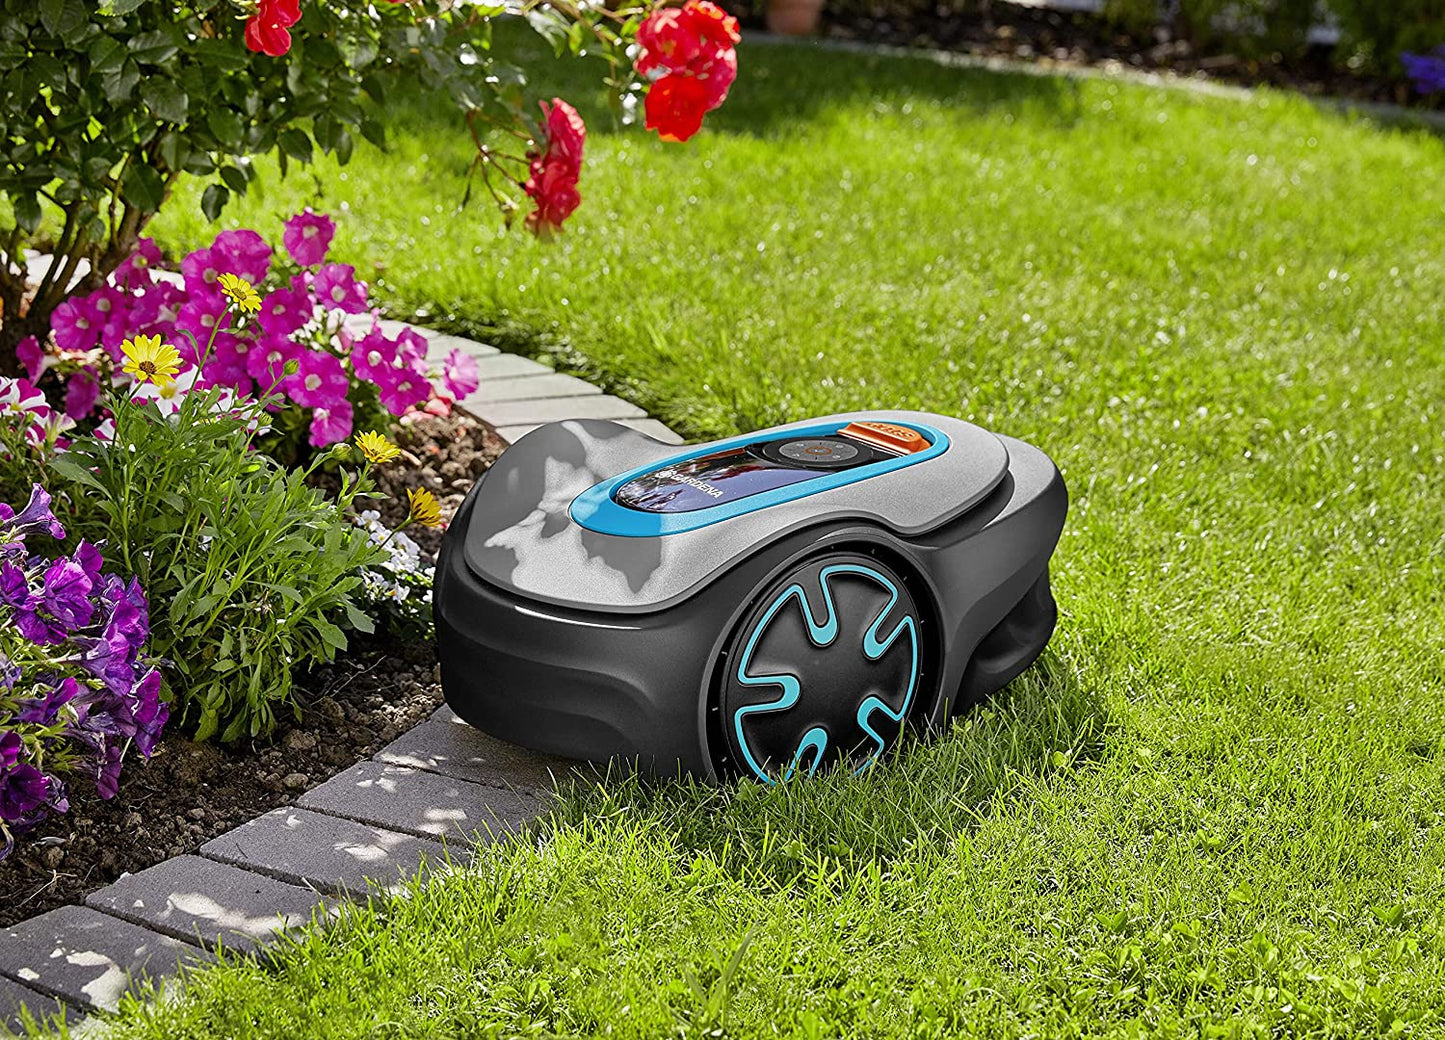 A robotic lawn mover under the shade of some flowers resting on a lawn.